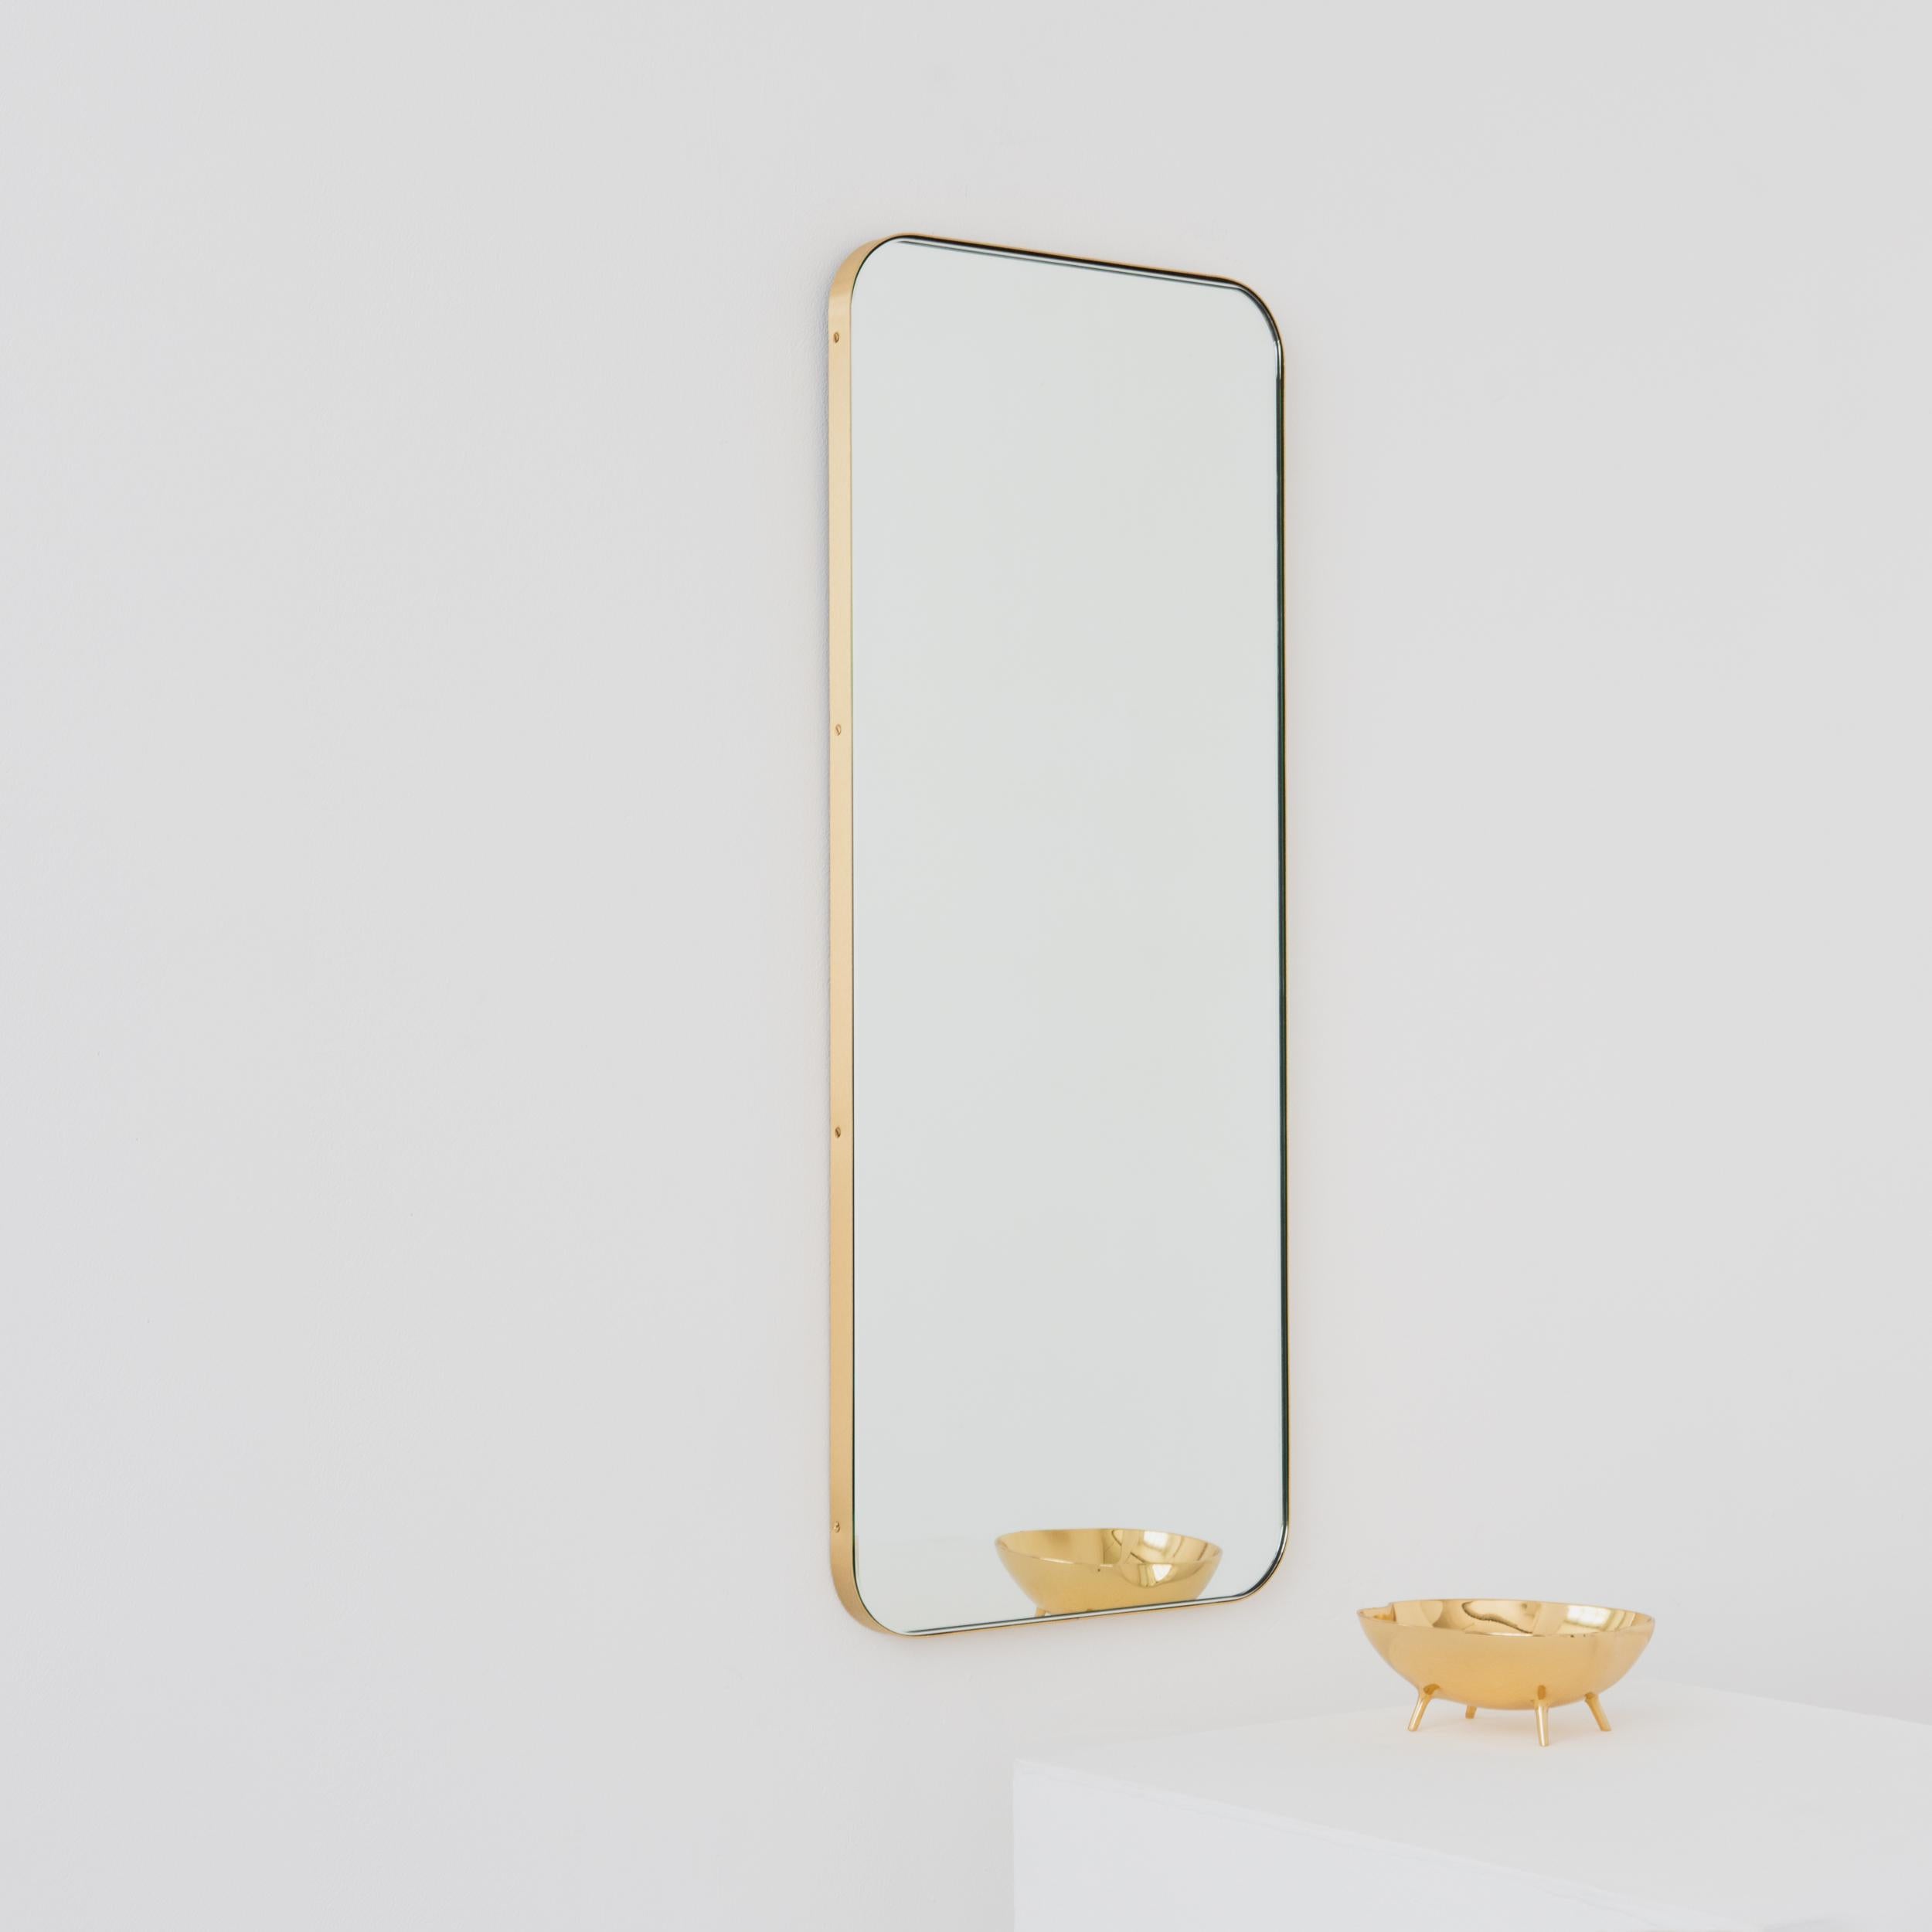 Quadris Rectangular Minimalist Mirror with a Brass Frame, Medium In New Condition For Sale In London, GB